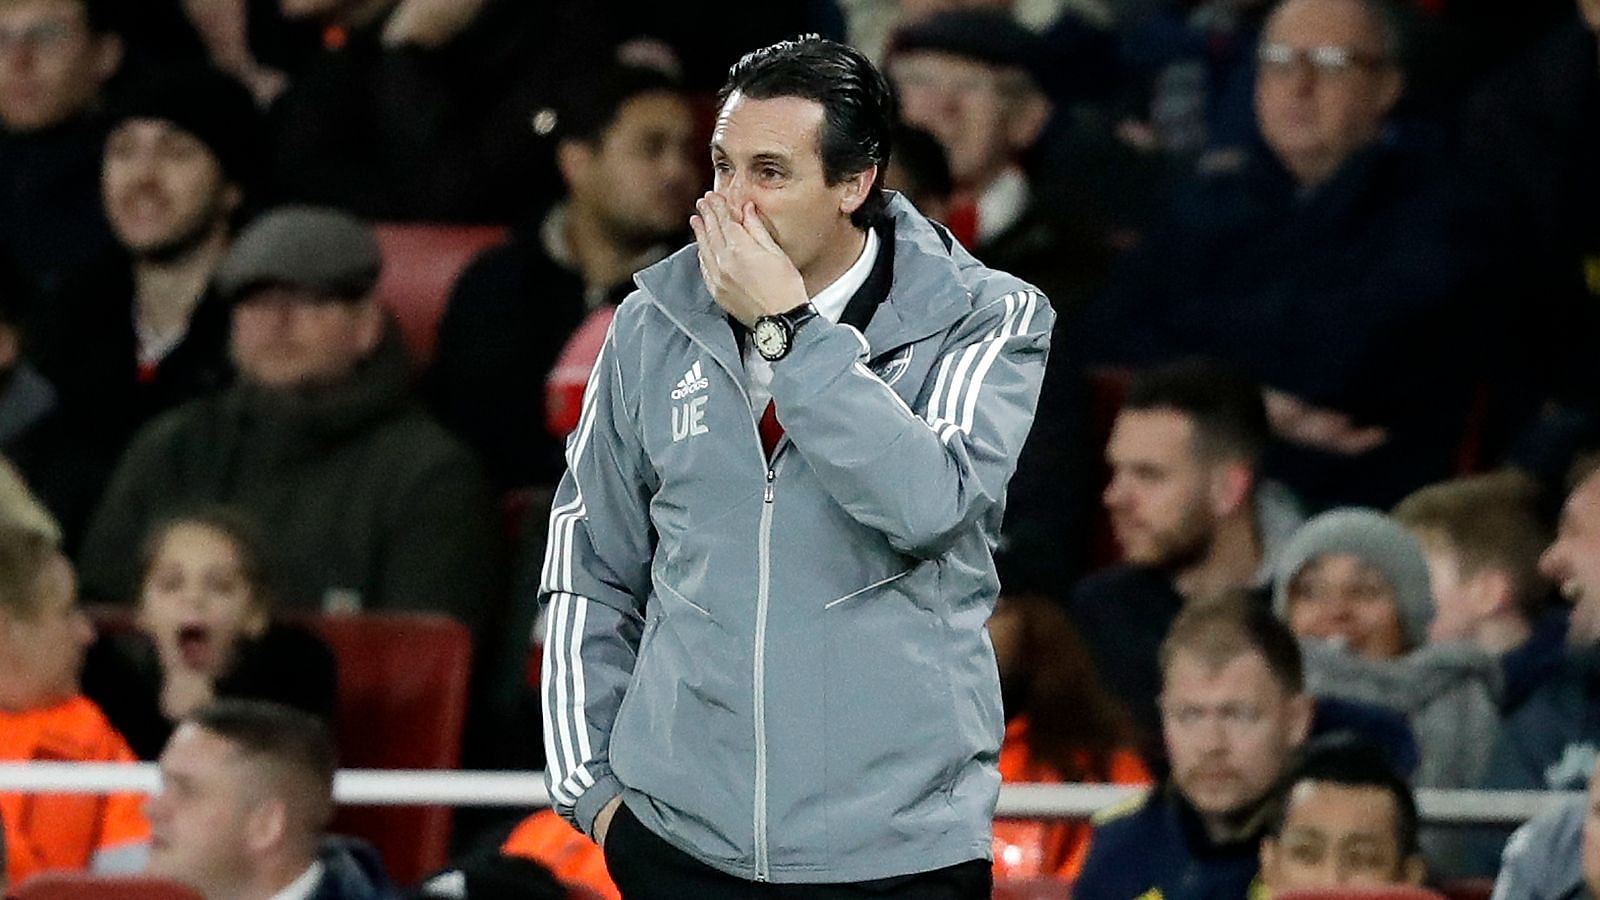 Arsenal’s head coach Unai Emery during the Europa League match between Arsenal and Eintracht Frankfurt in London on Thursday.